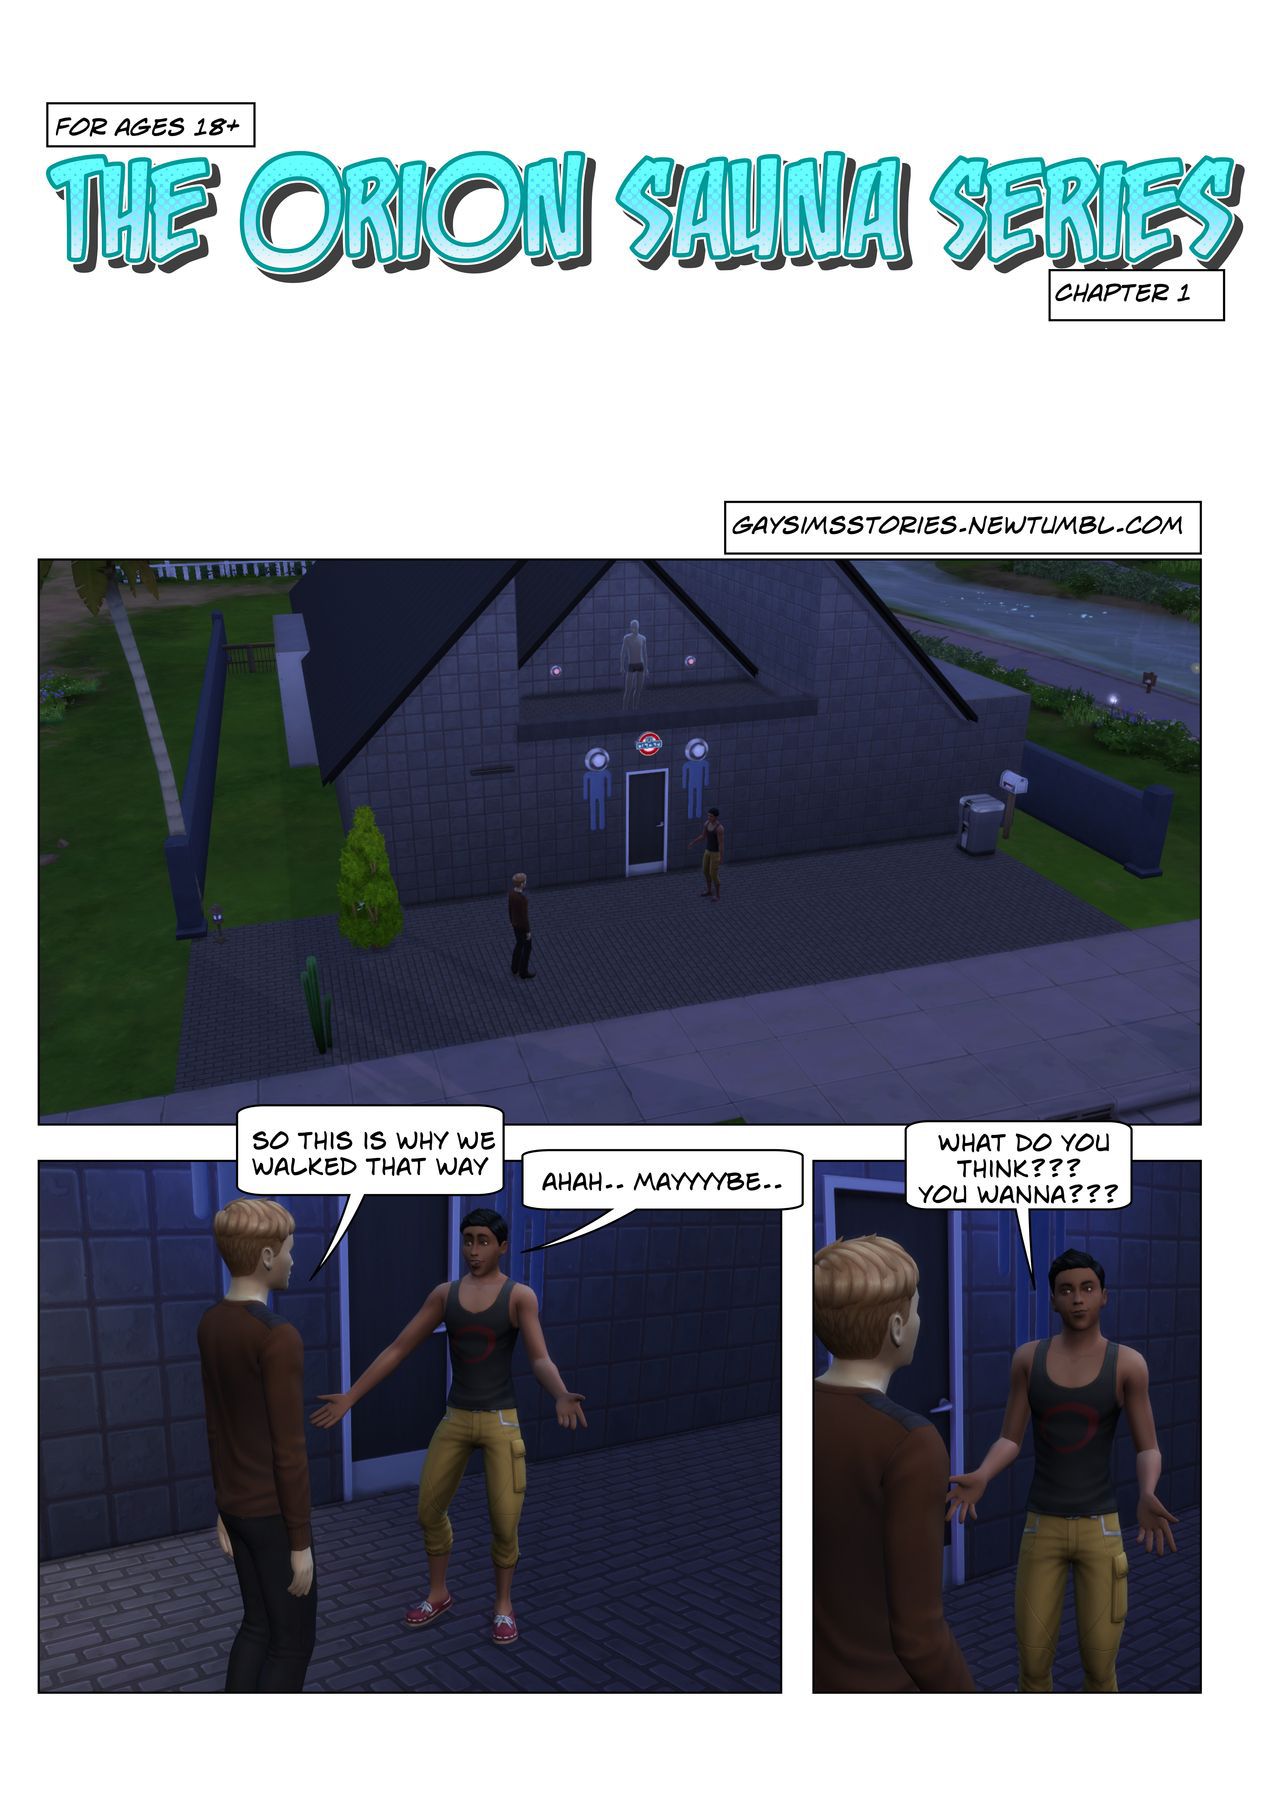 (ENG) Orion sauna series part 1 (gay sims stories) 1